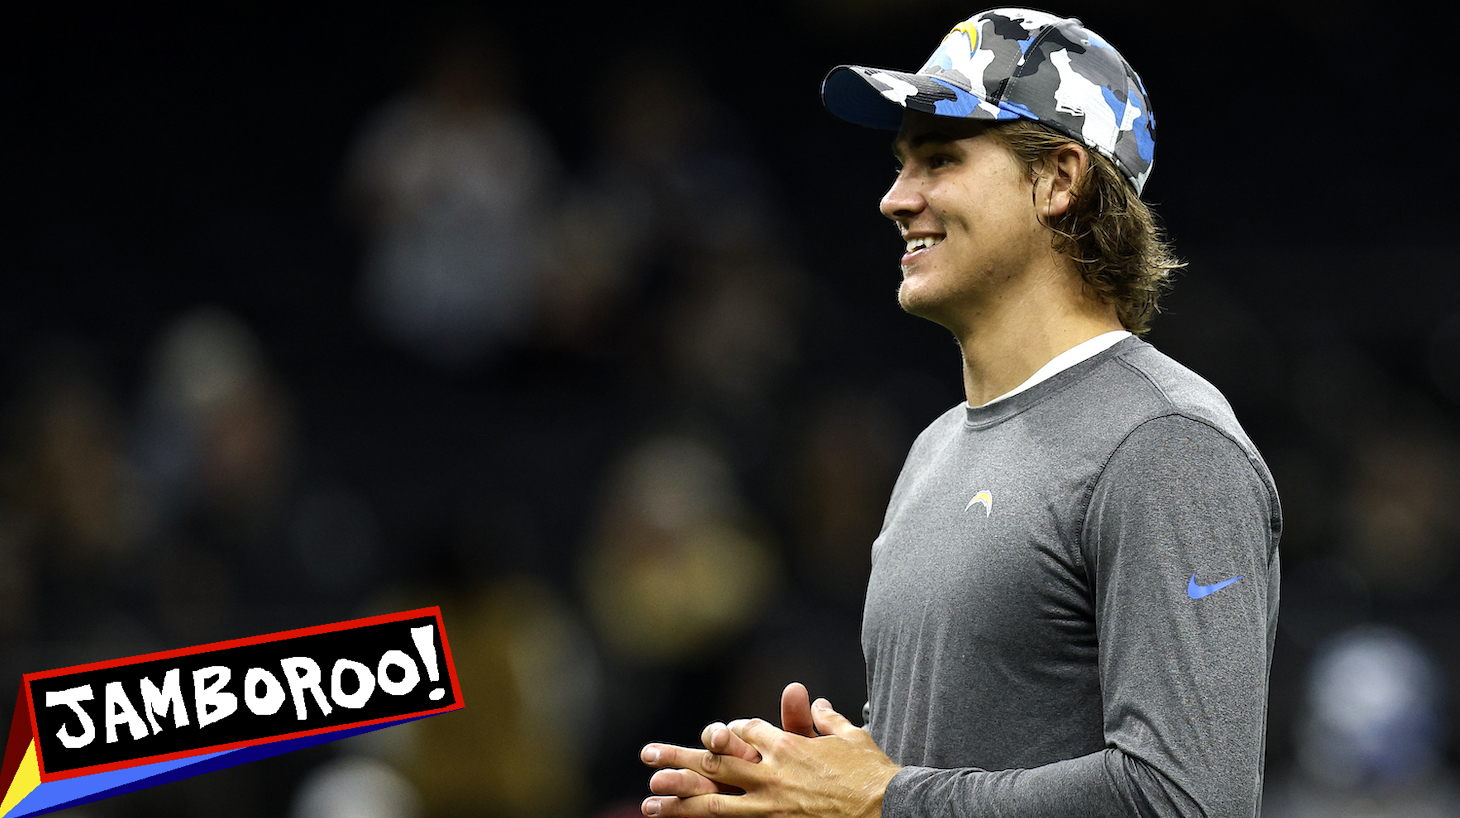 NEW ORLEANS, LOUISIANA - AUGUST 26: Justin Herbert #10 of the Los Angeles Chargers stands on the field prior to the start of an NFL preseason against the New Orleans Saints at Caesars Superdome on August 26, 2022 in New Orleans, Louisiana. (Photo by Sean Gardner/Getty Images)